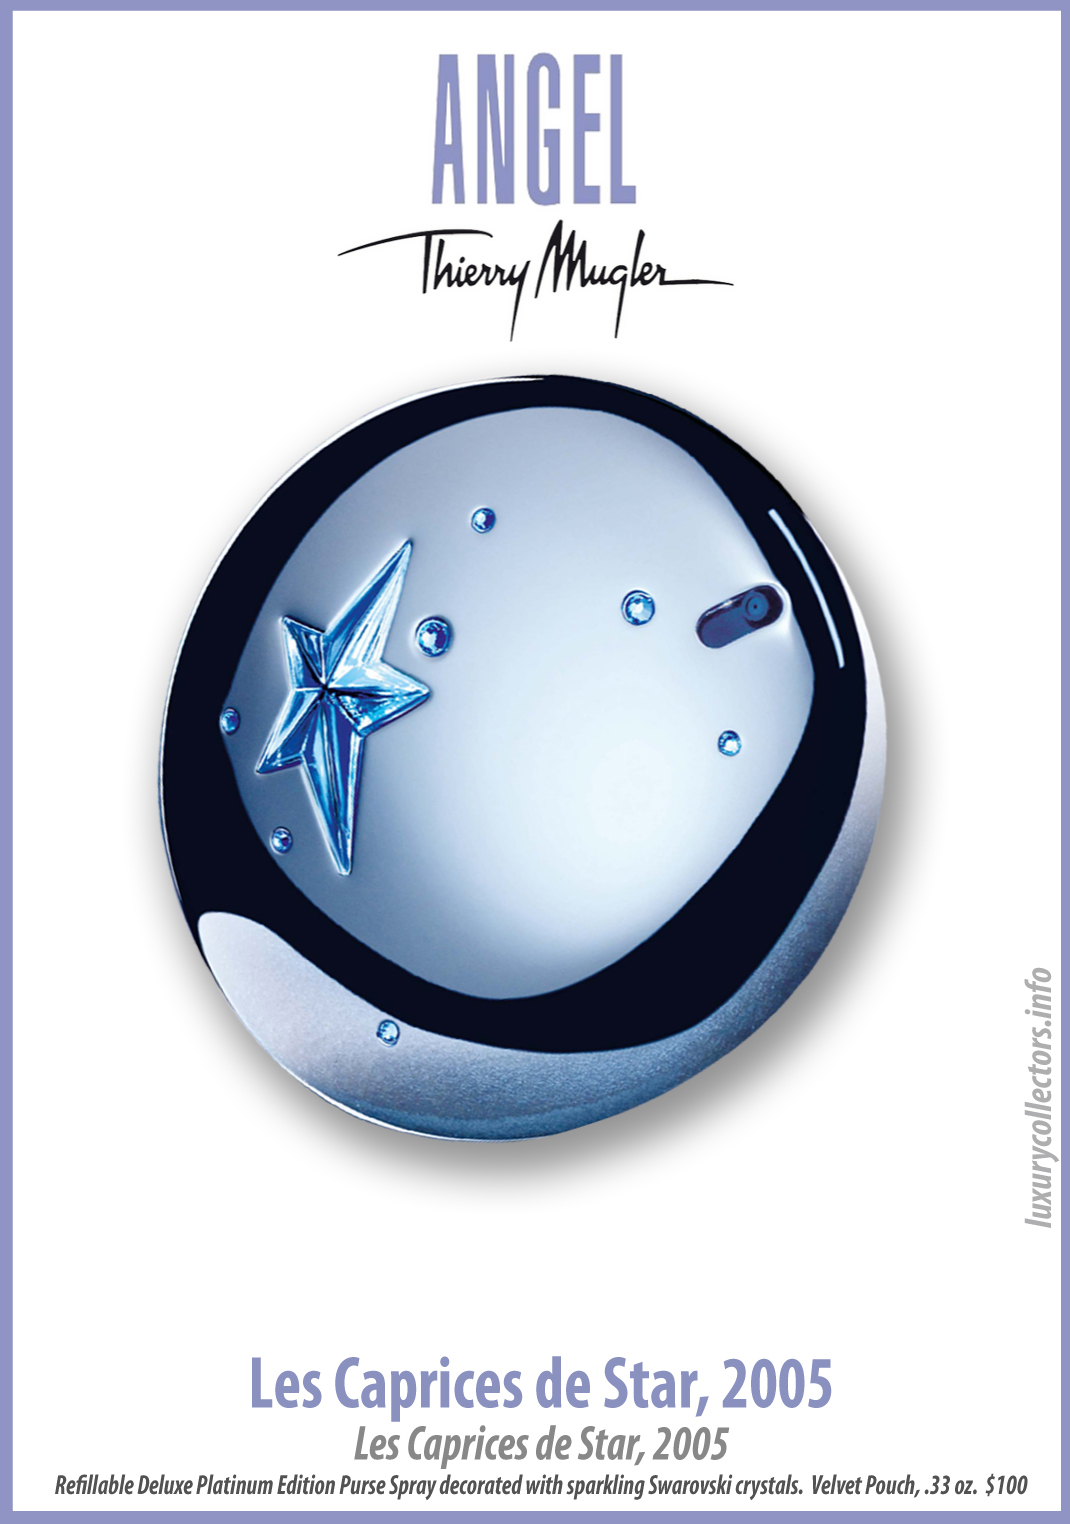 Thierry Mugler Angel Perfume Collector's Limited Edition Bottle 2005 Les Caprices de Star Purse Spray